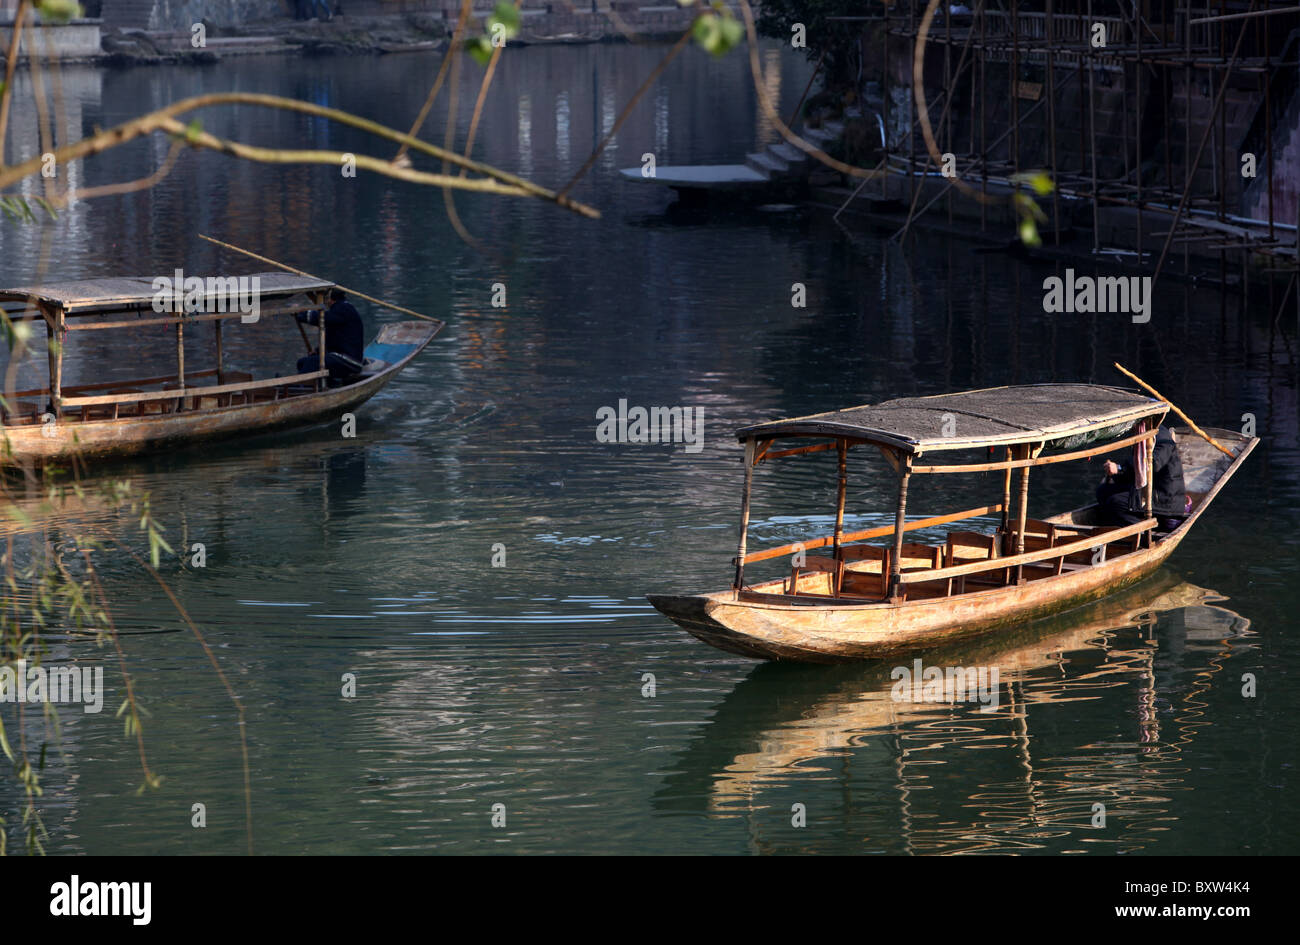 Fenghuang town in Hunan Province, China. Phoenix Ancient City Stock Photo